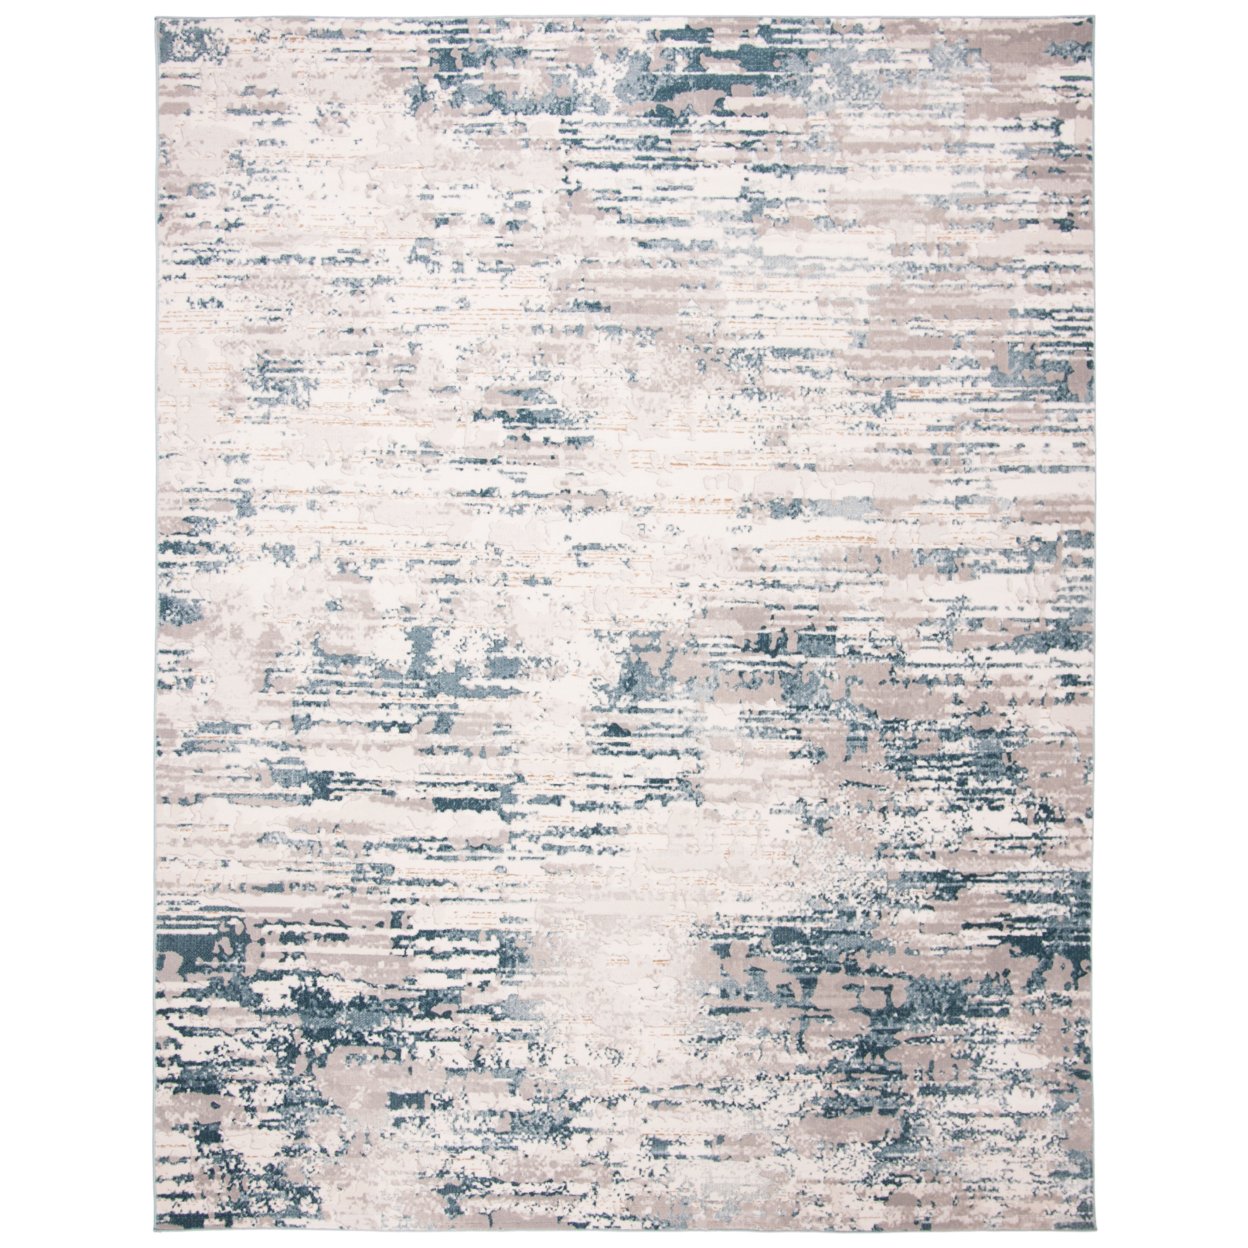 SAFAVIEH Vogue Collection VGE145A Ivory / Teal Rug - 2' 0 X 10' 0